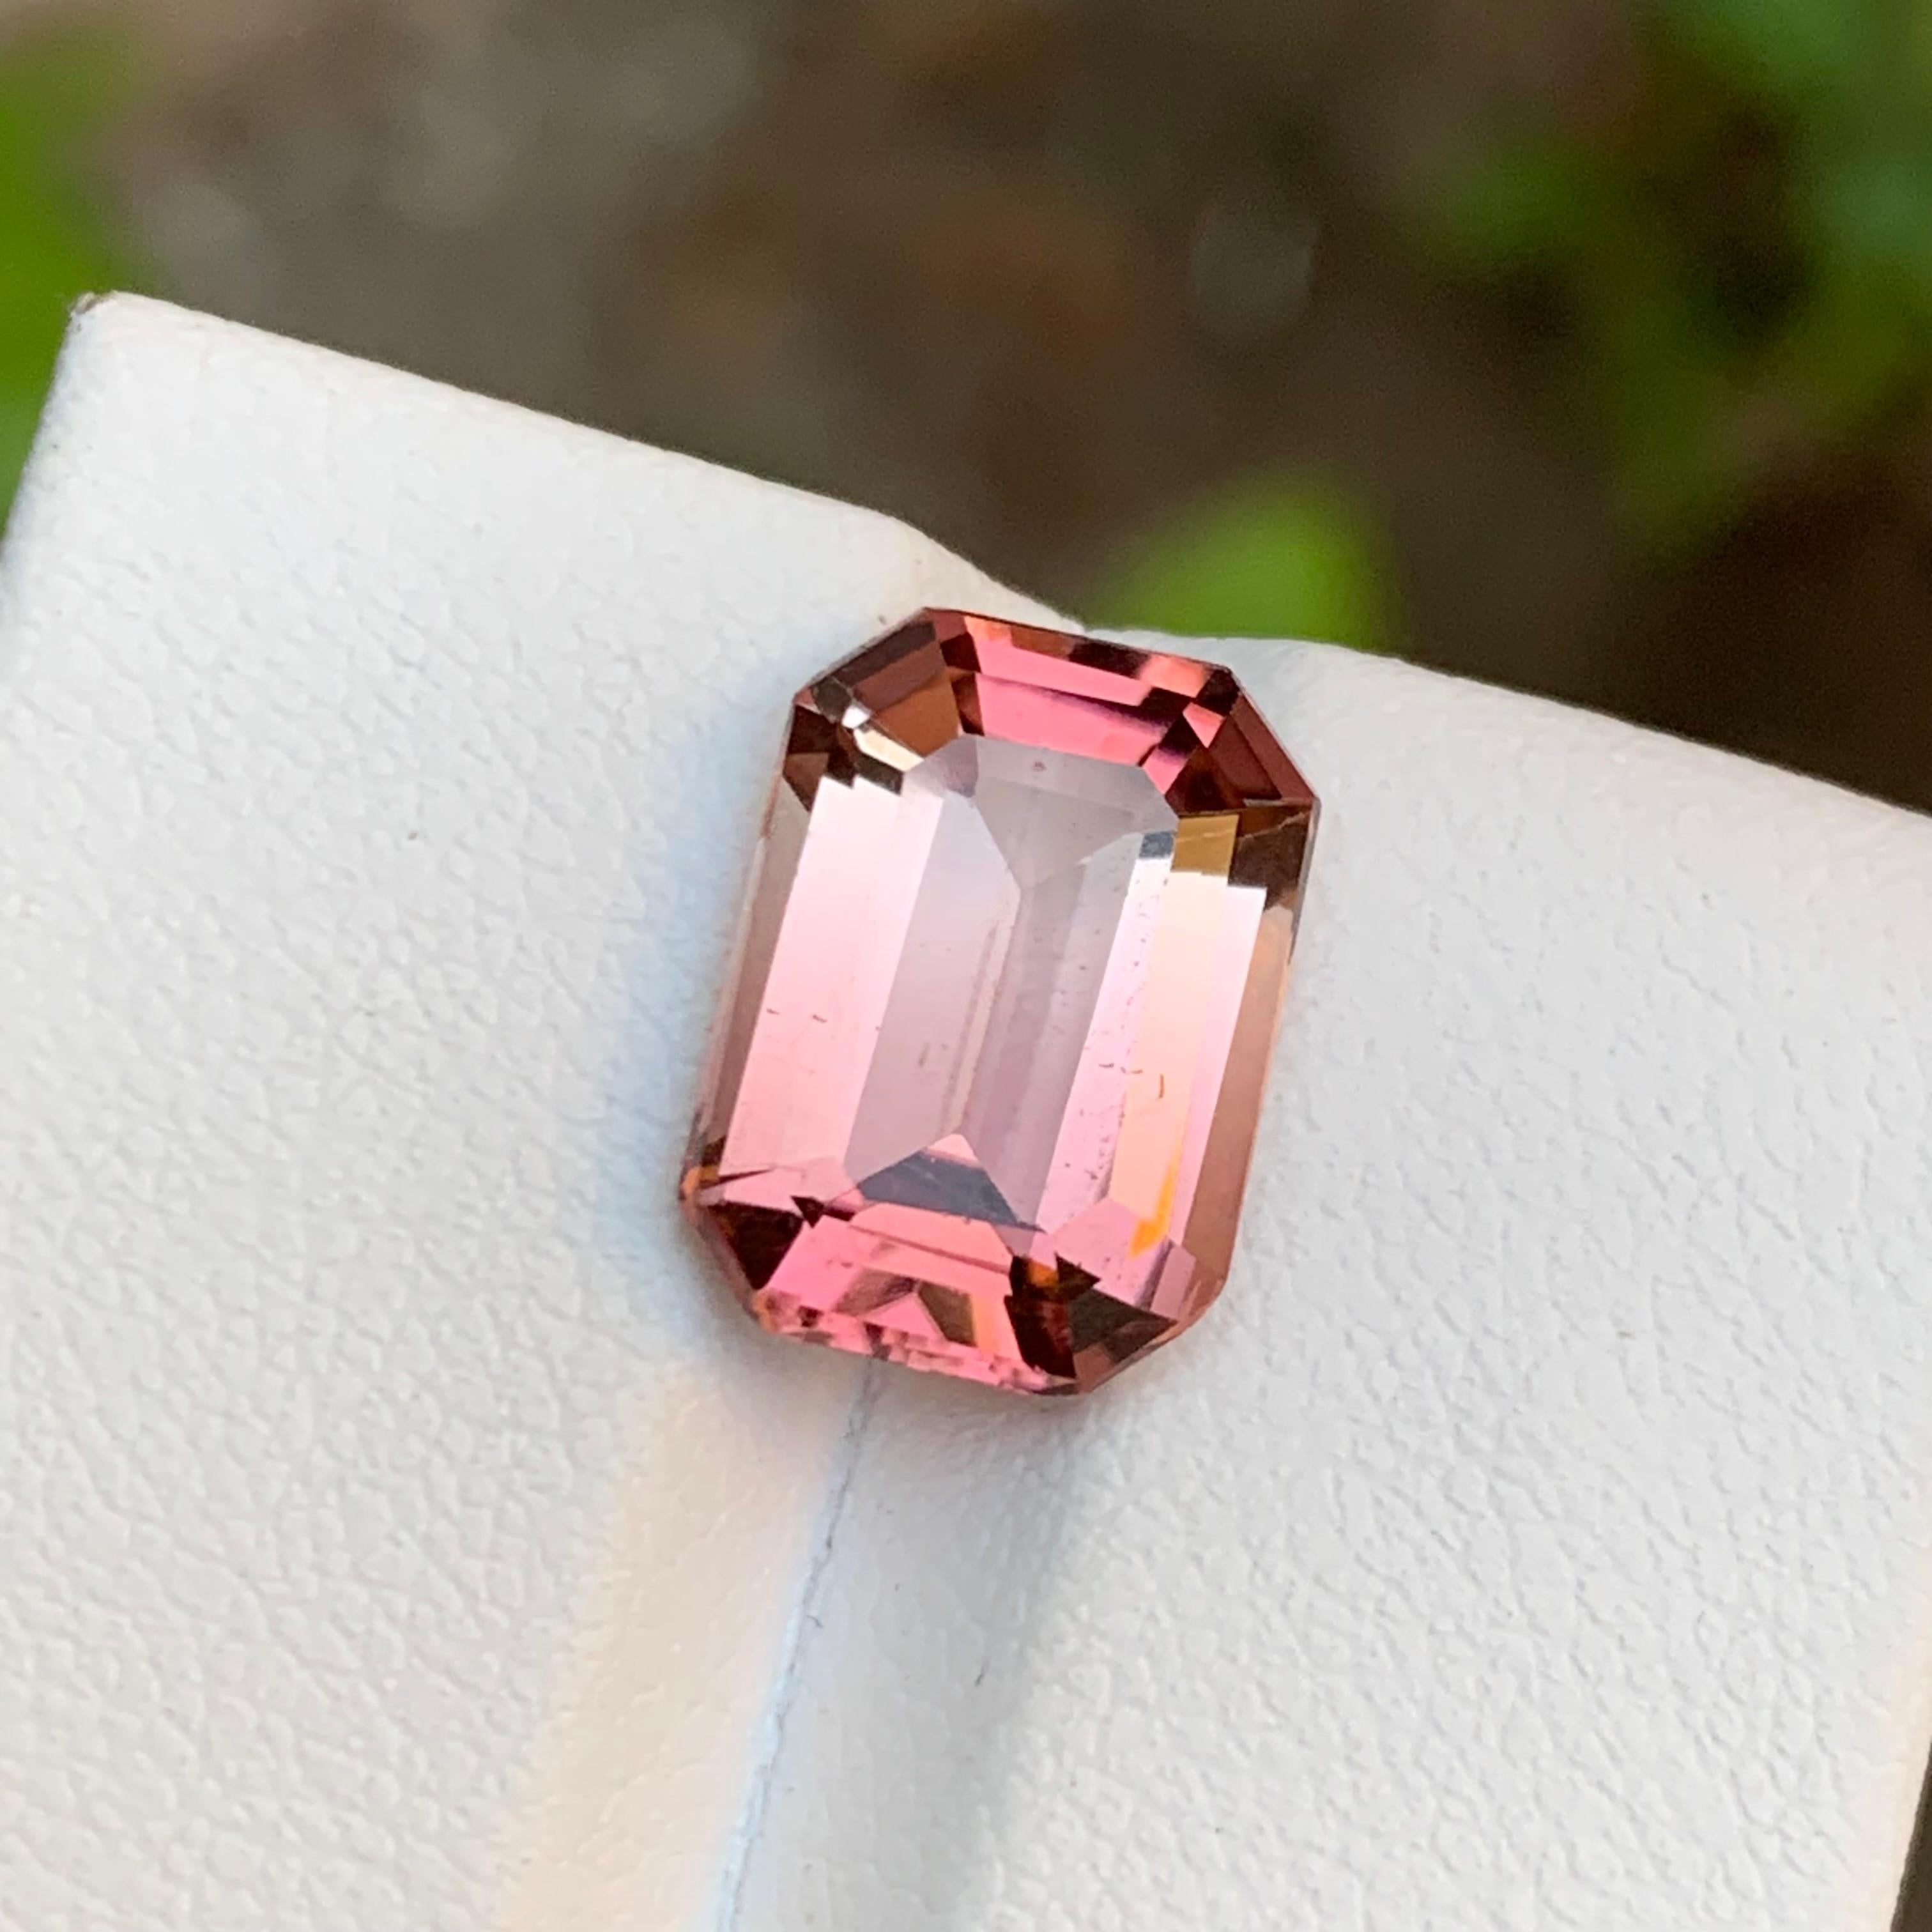 Rare Peachy Pink Bicolor Natural Tourmaline Gemstone, 4.80 Ct Emerald Cut-Ring  For Sale 6